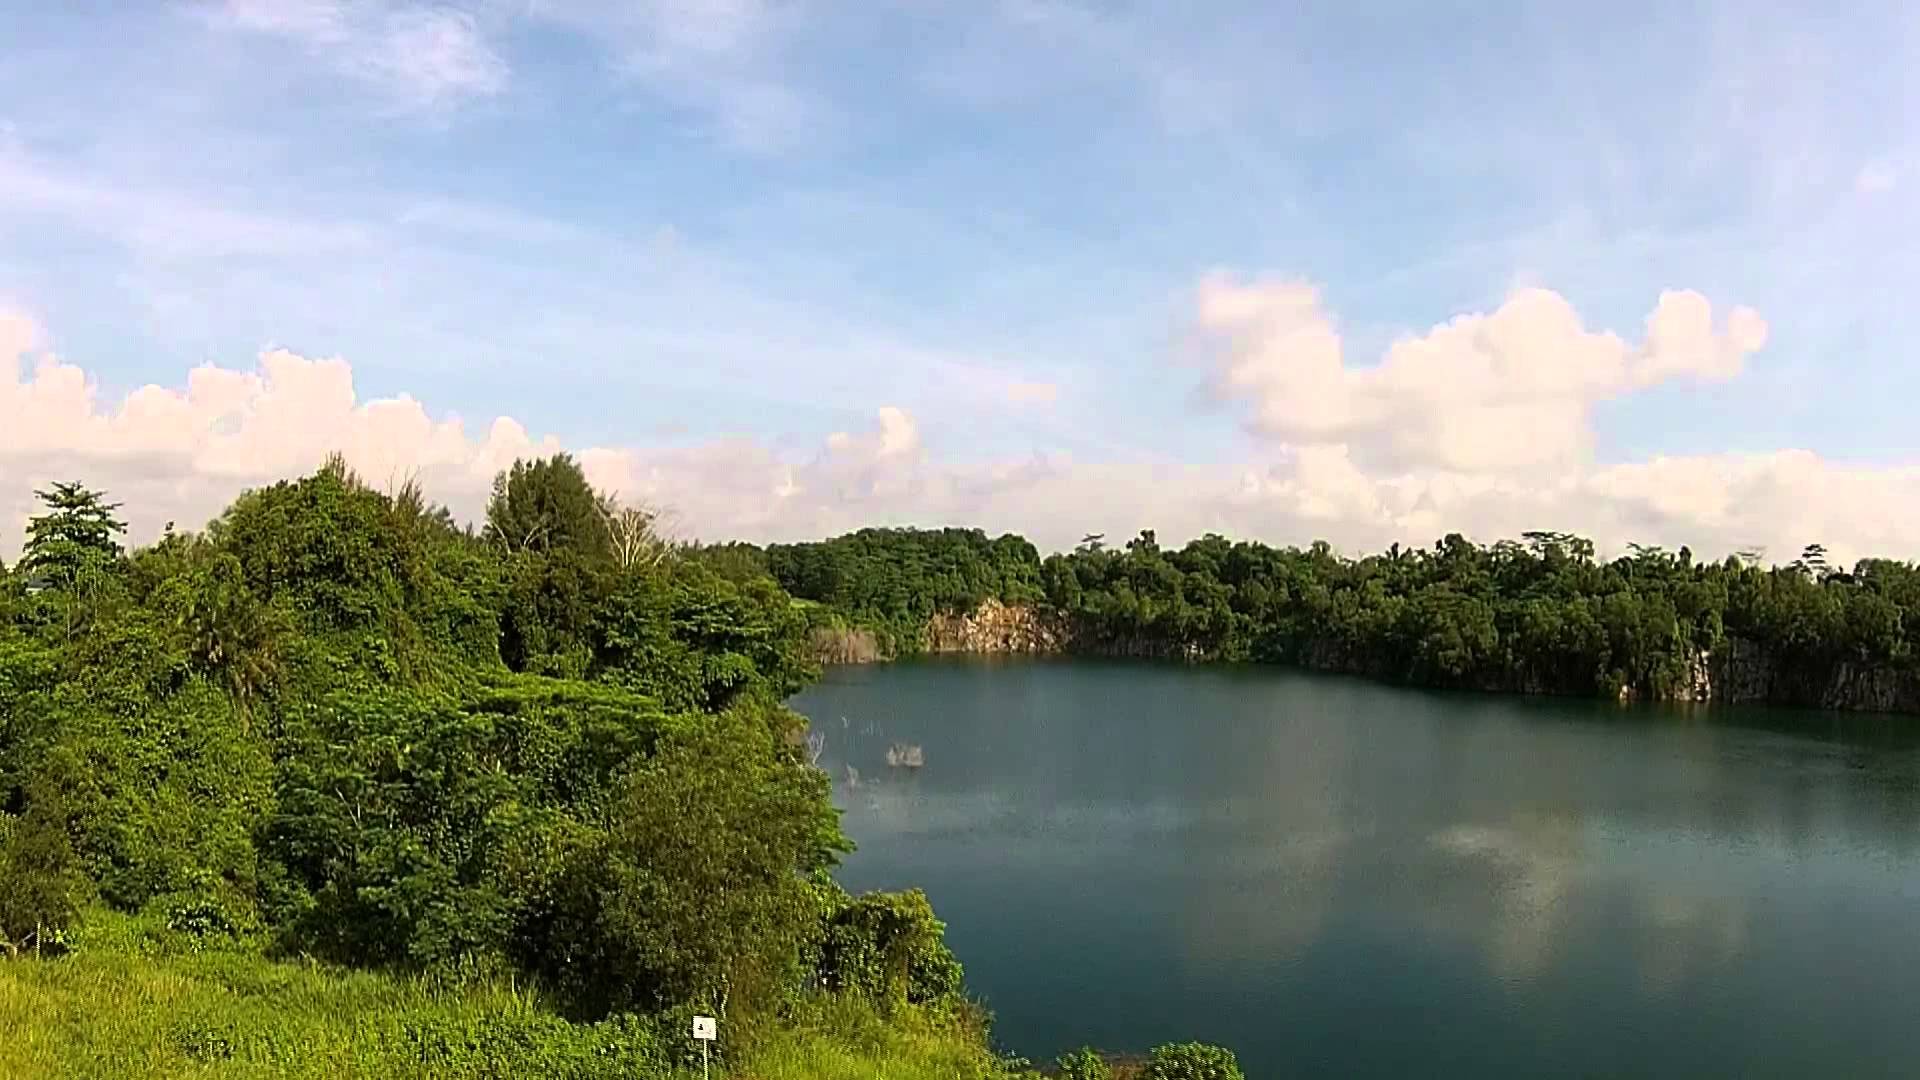 Ketam Quarry, also known as Aik Hwa Quarry, is a disused quarry located in western Pulau Ubin.